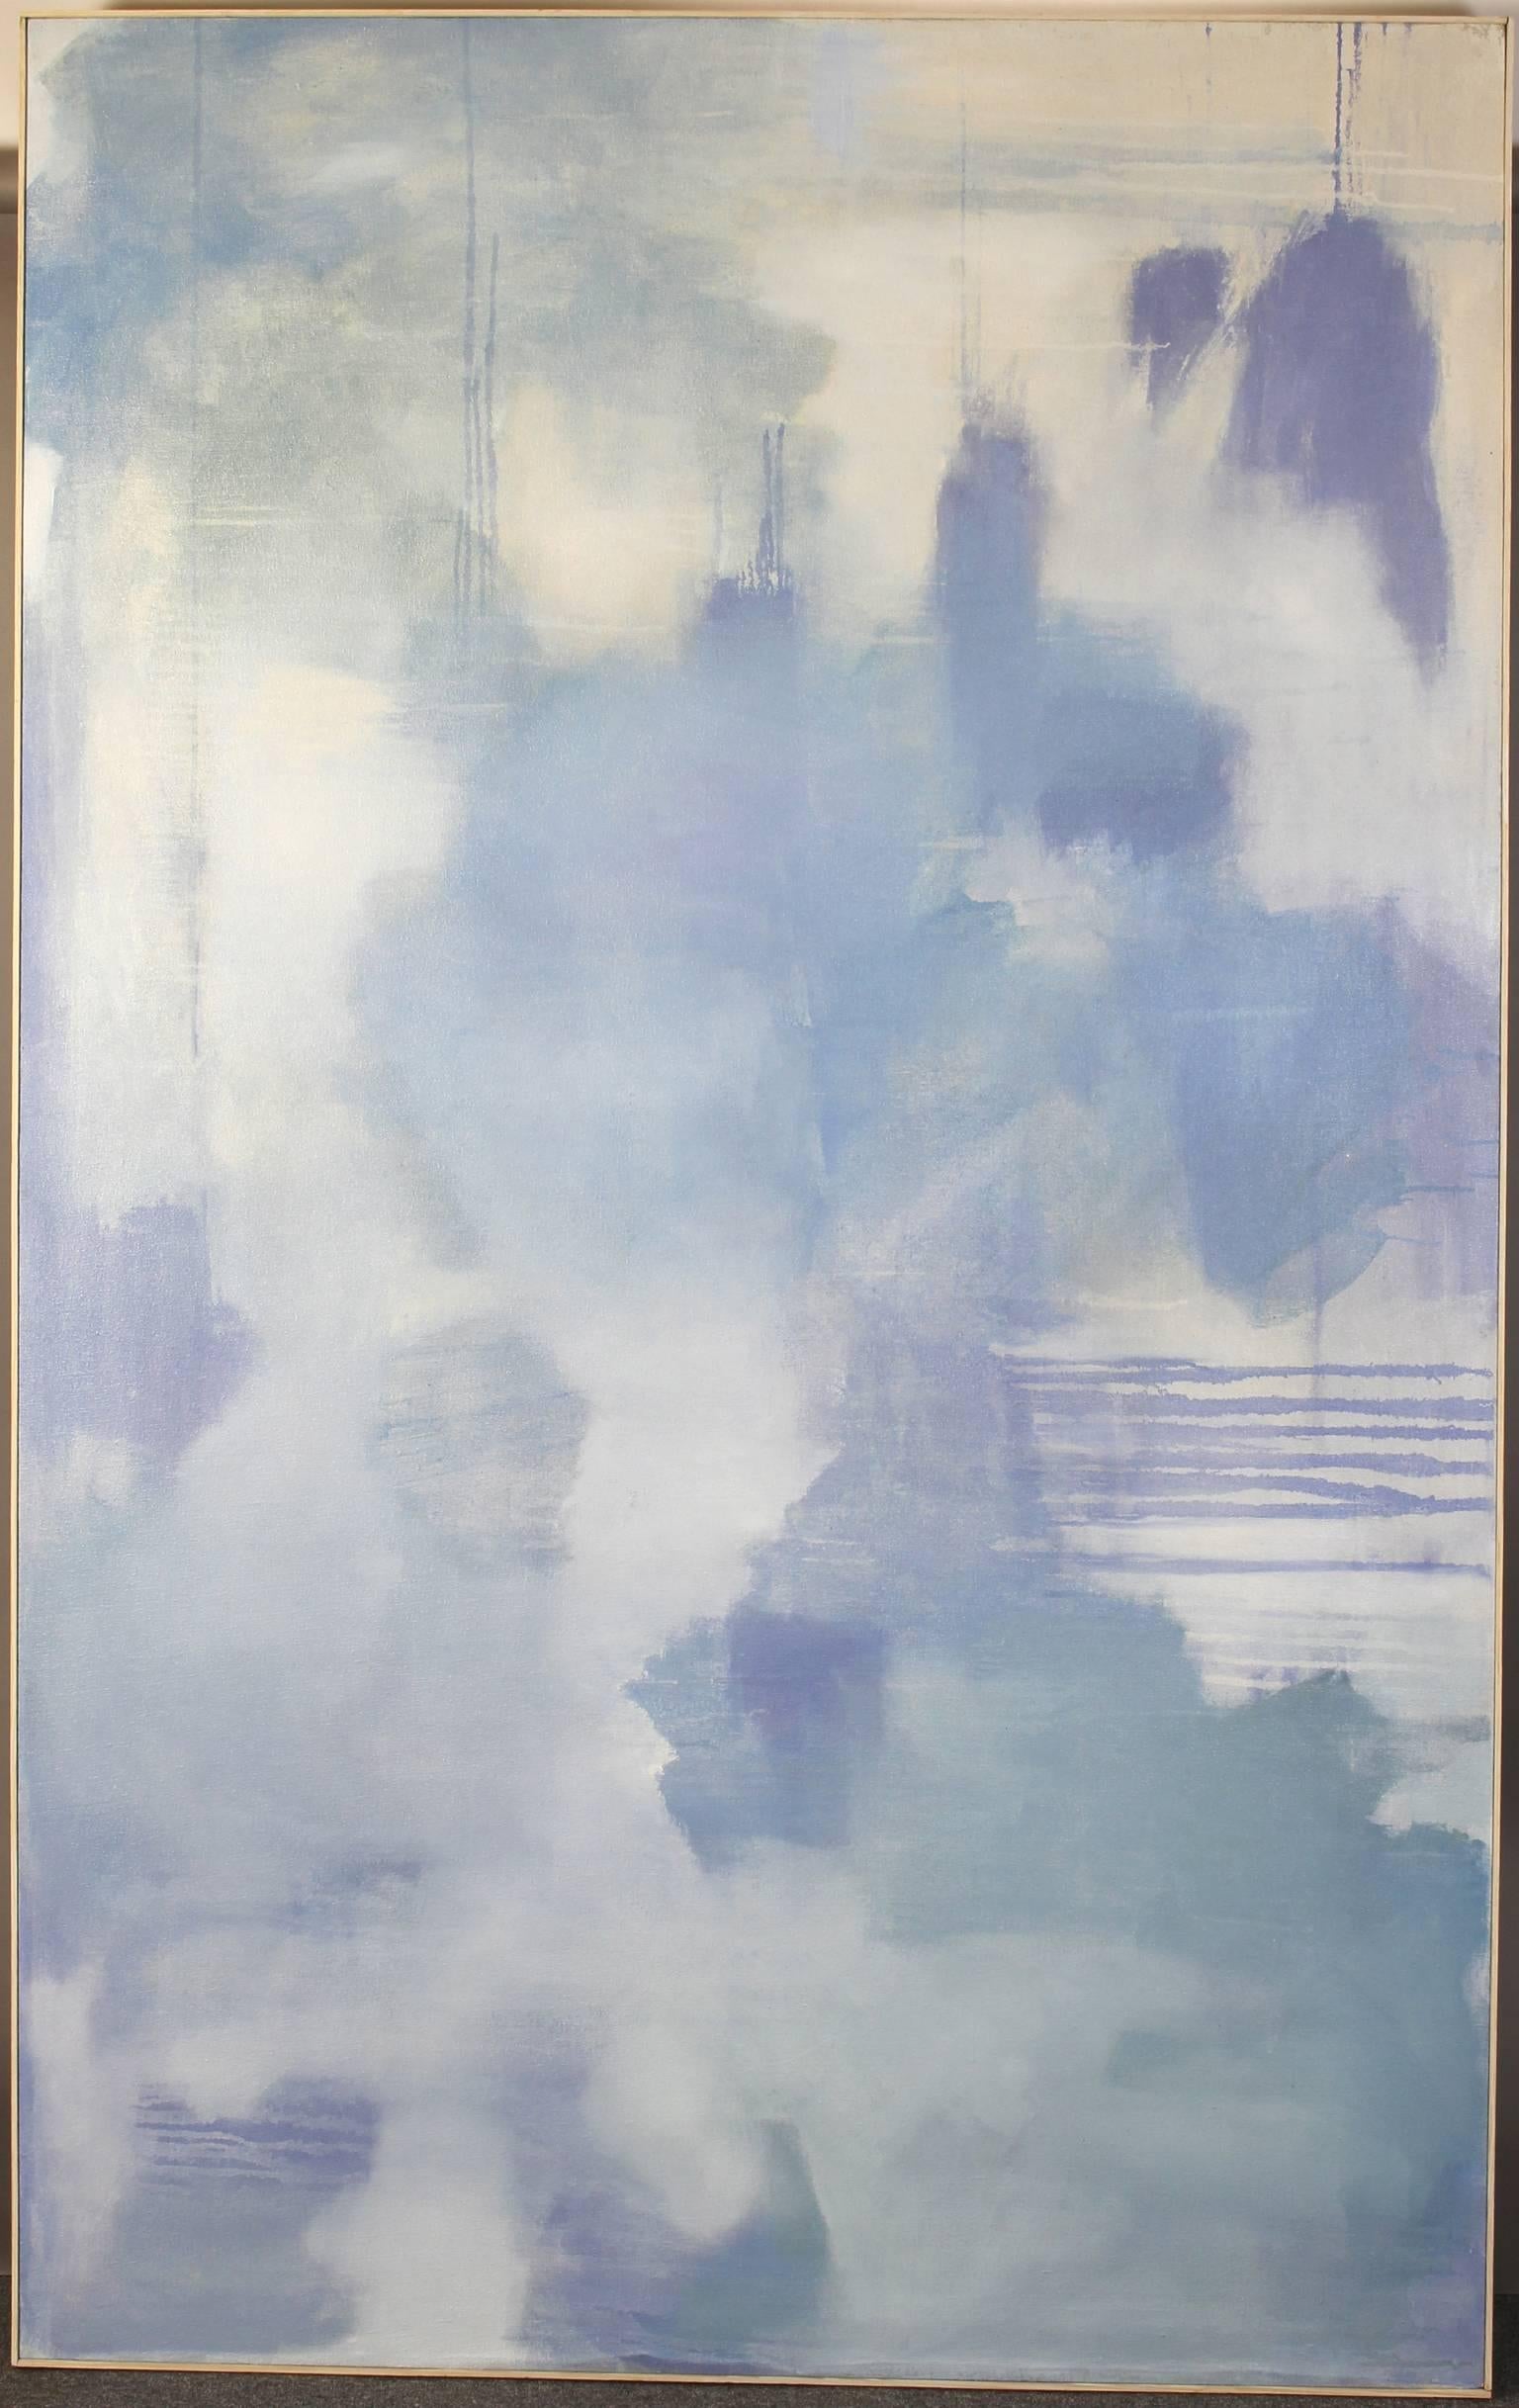 An exceptionally large acrylic on canvas painting in a palette of blues, lilac and green by David Bell.